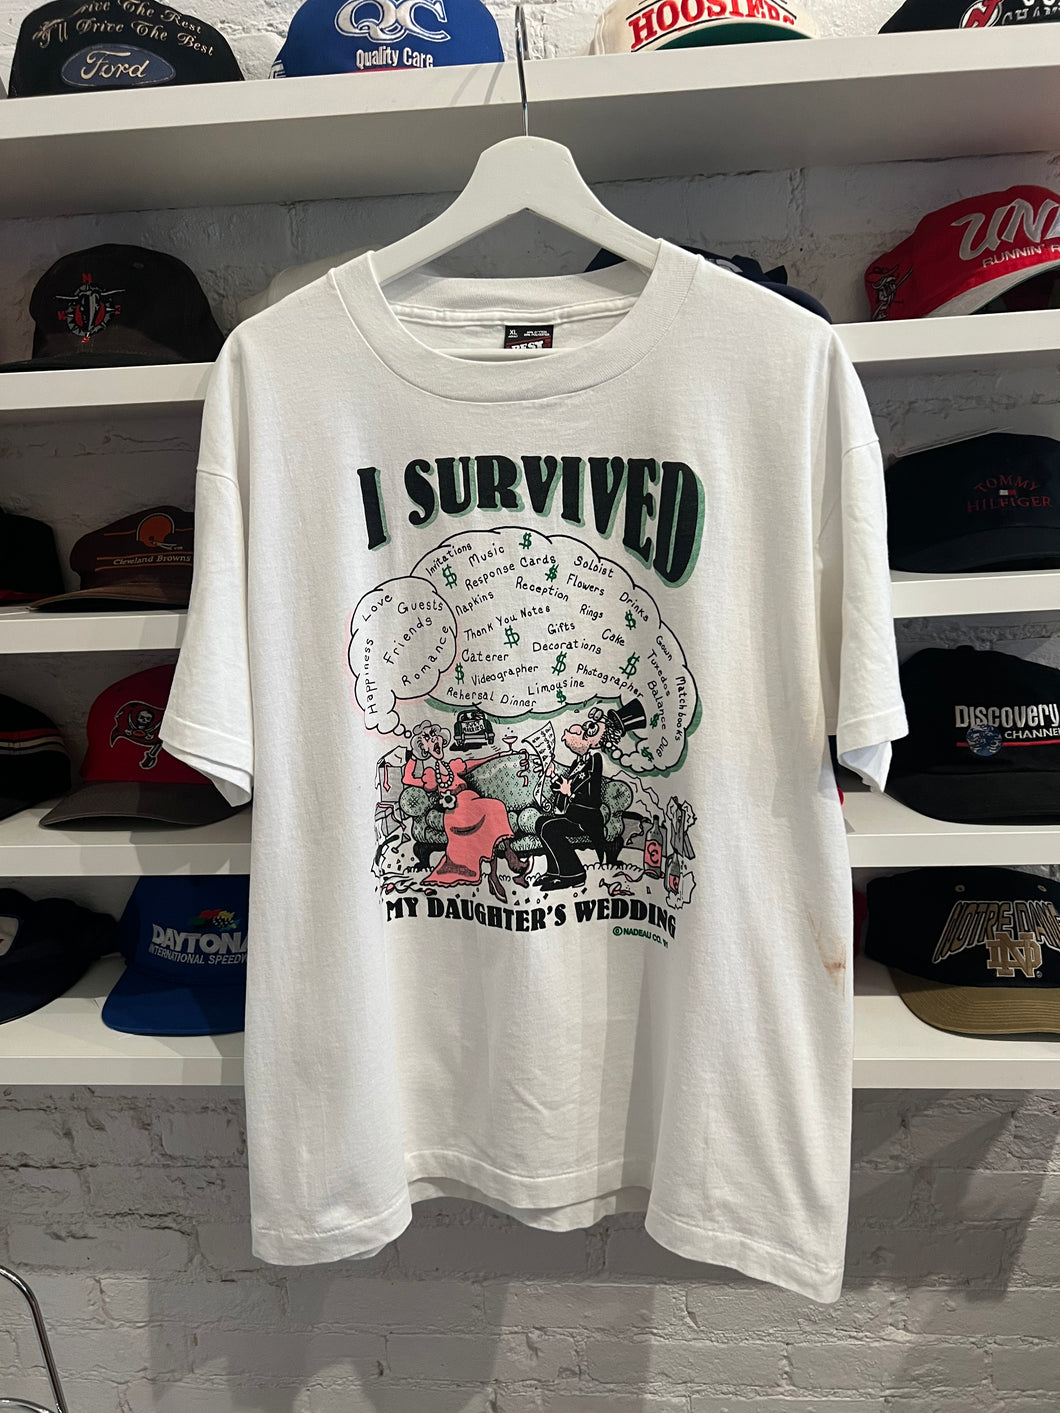 I Survived my Daughter’s Wedding T-shirt size XL